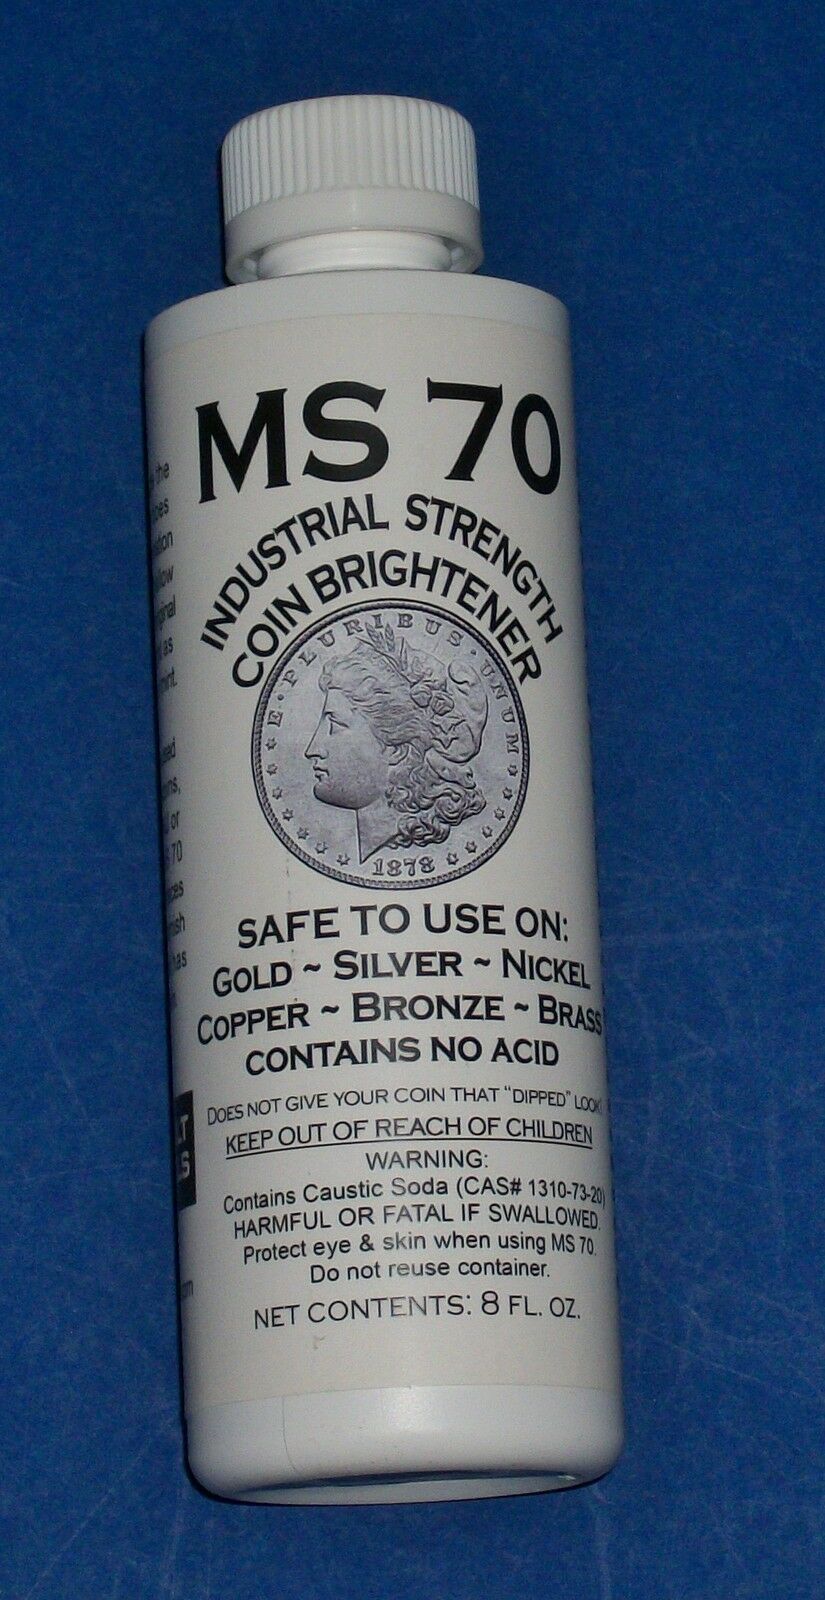 MS 70 8 oz. Coin Cleaner Brightener for Gold Silver Copper Bronze Brass  Nickel - St. Simons Island.com